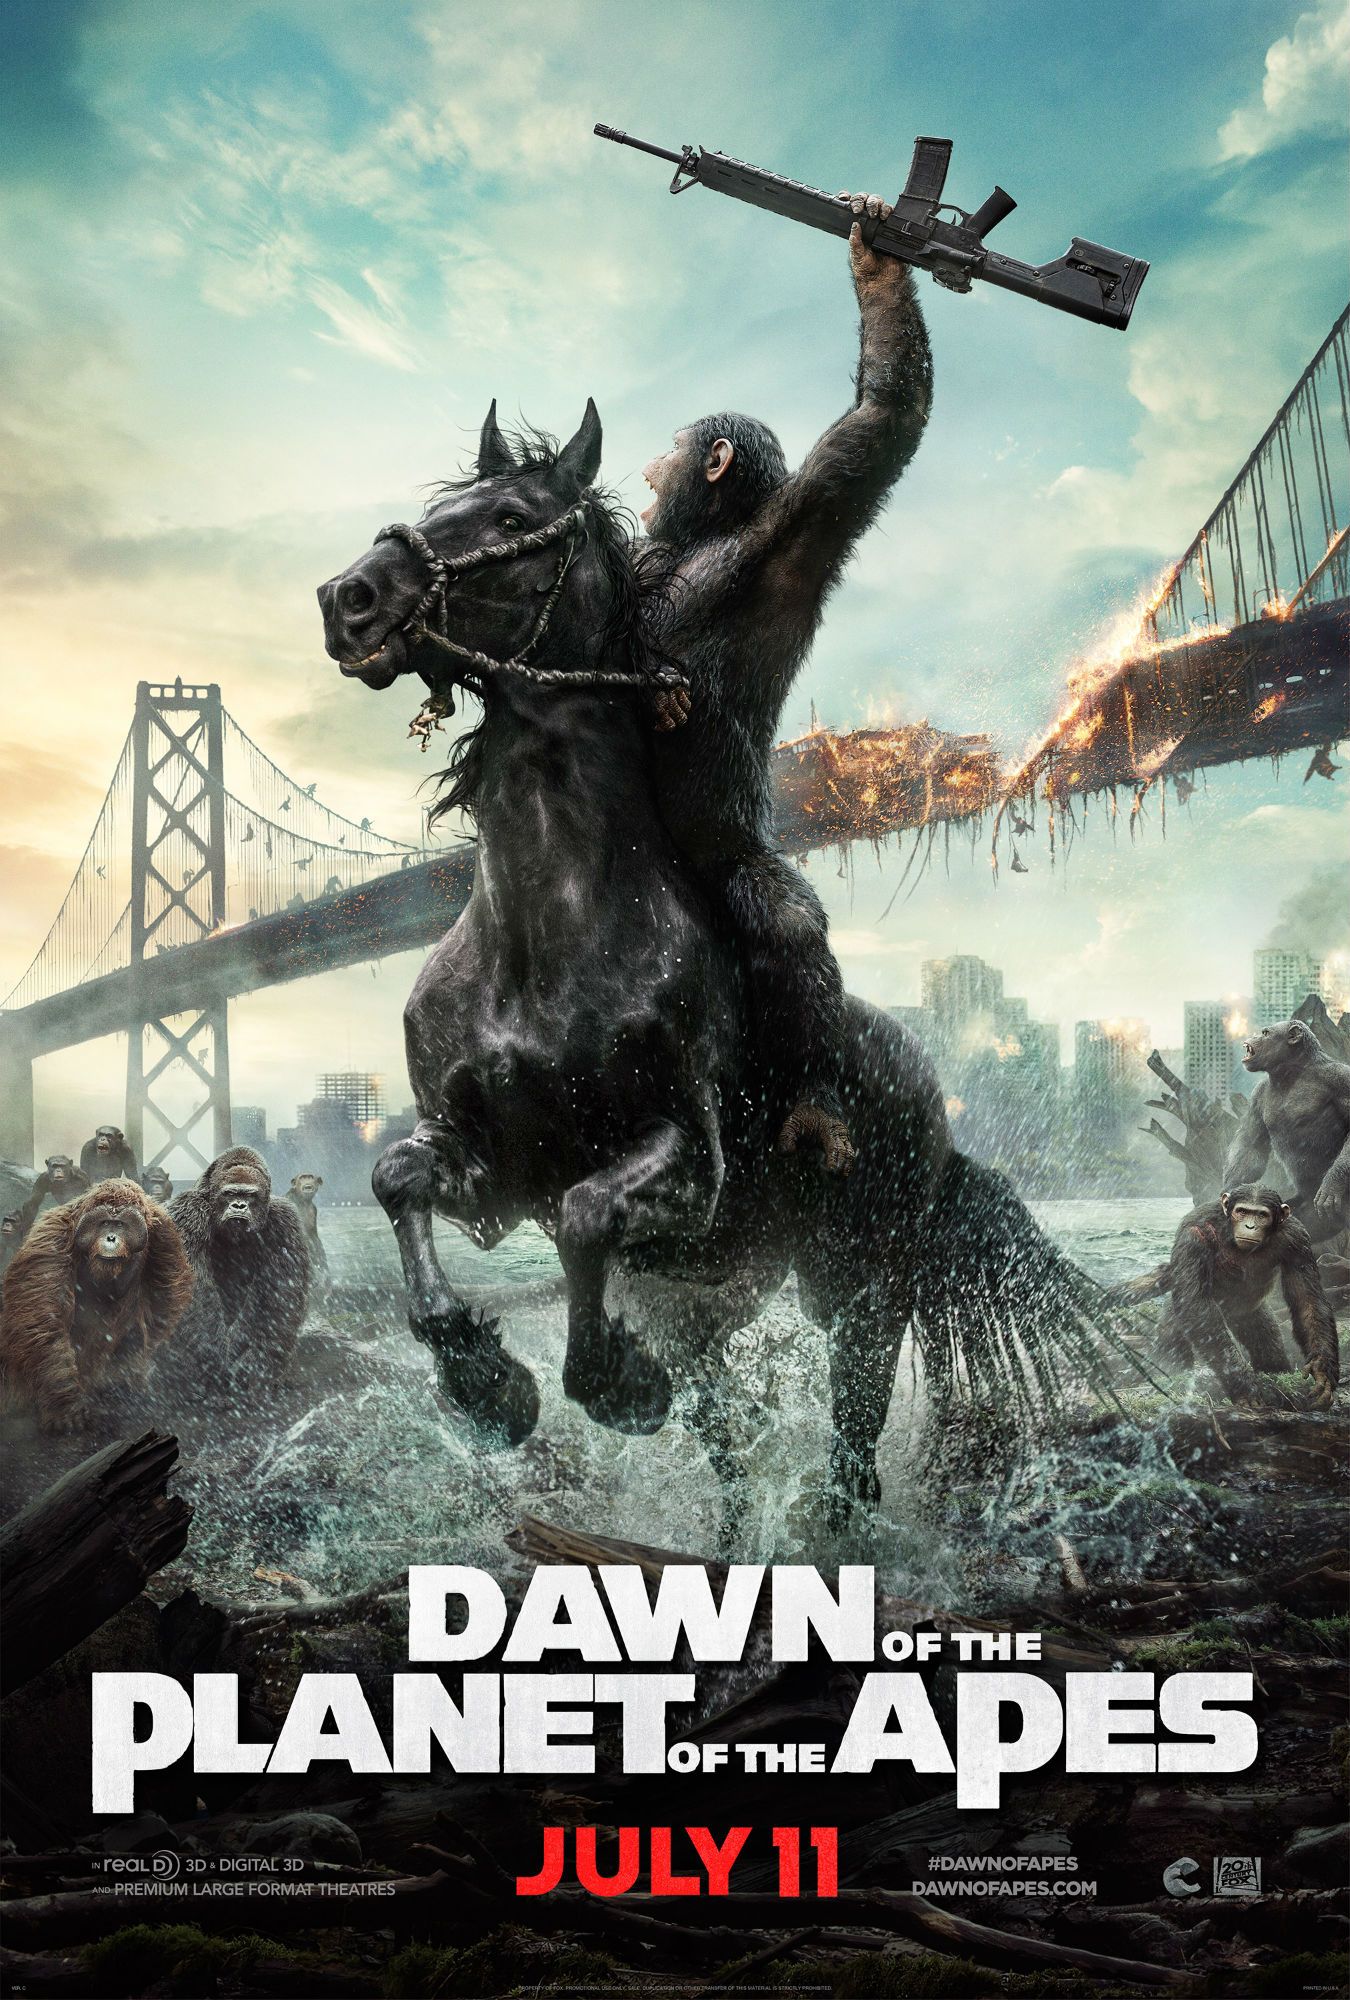 New 'Dawn of the Planet of the Apes' poster